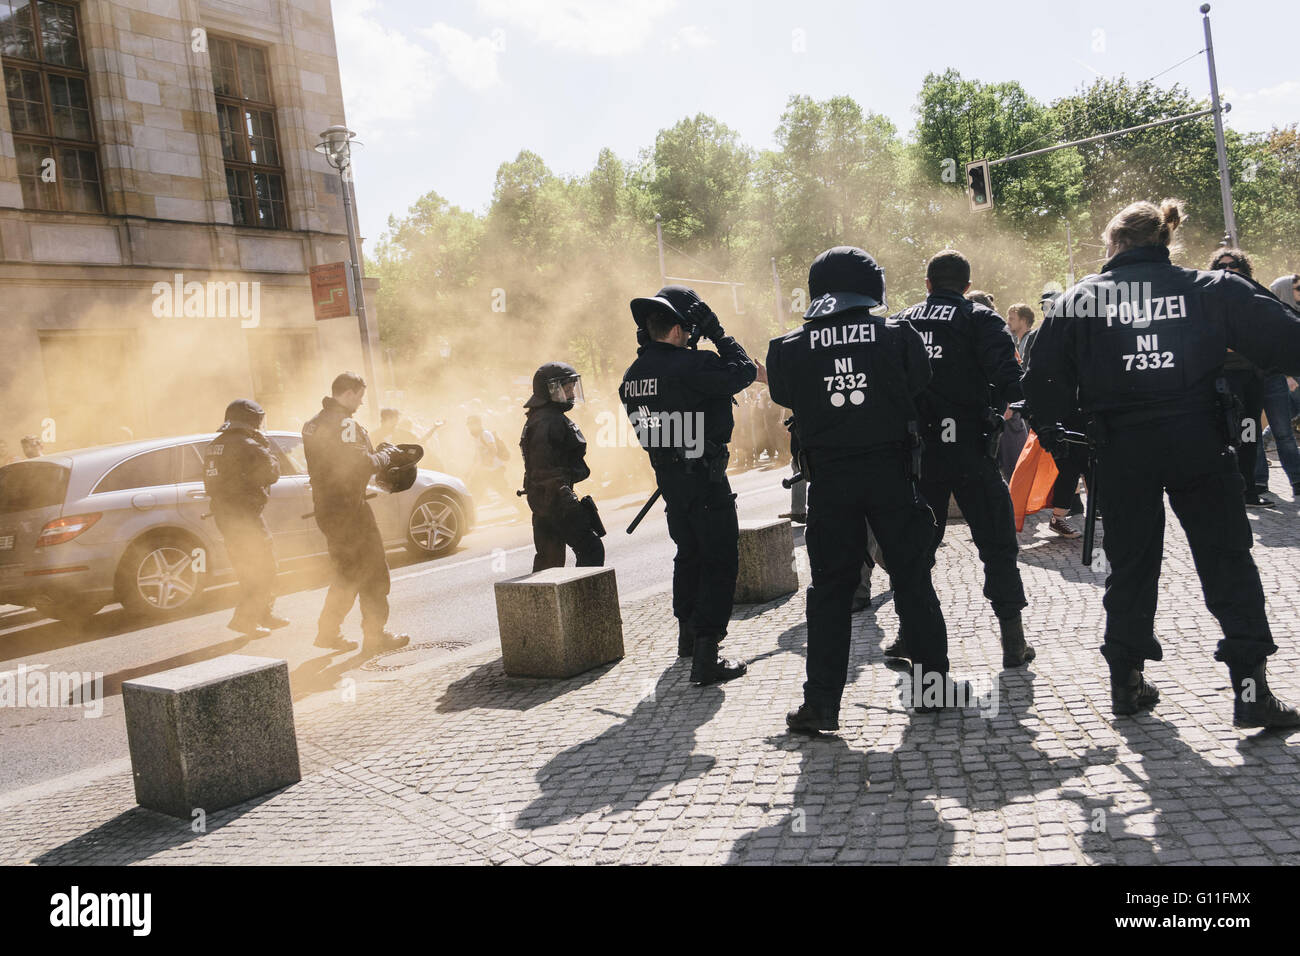 Berlin, Germany. 7th May, 2016. Police secures a road after protesters break through a police barrier during the counter protests against the rally held under the motto 'Merkel muss weg![Merkel must go]' organised by far-right group 'We for Berlin & We for Germany' Credit:  Jan Scheunert/ZUMA Wire/Alamy Live News Stock Photo